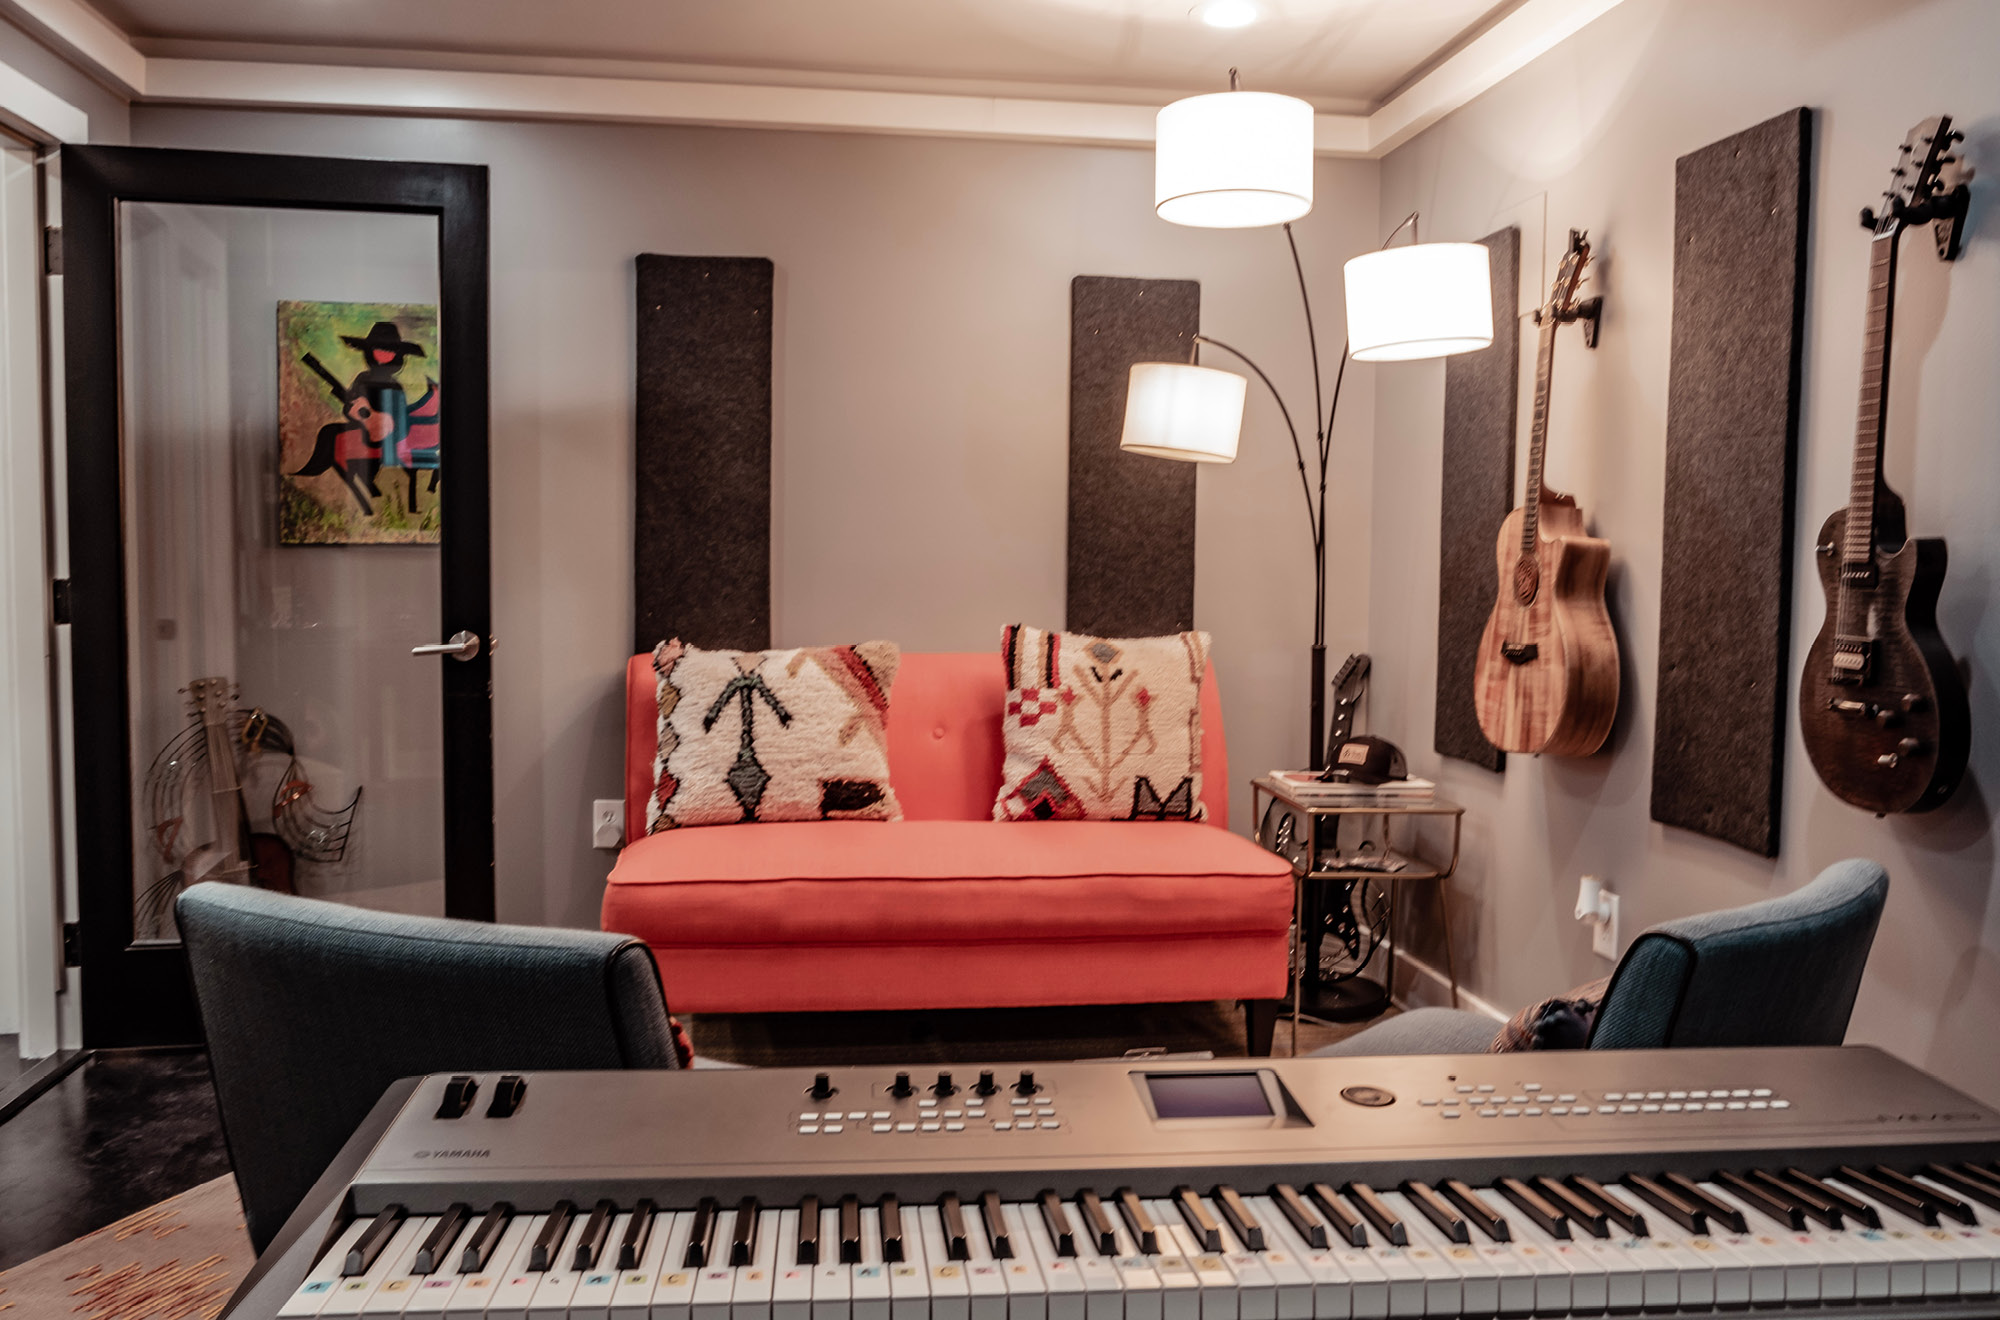 One of our writers rooms, equipped with a keyboard, guitars, and comfortable seating